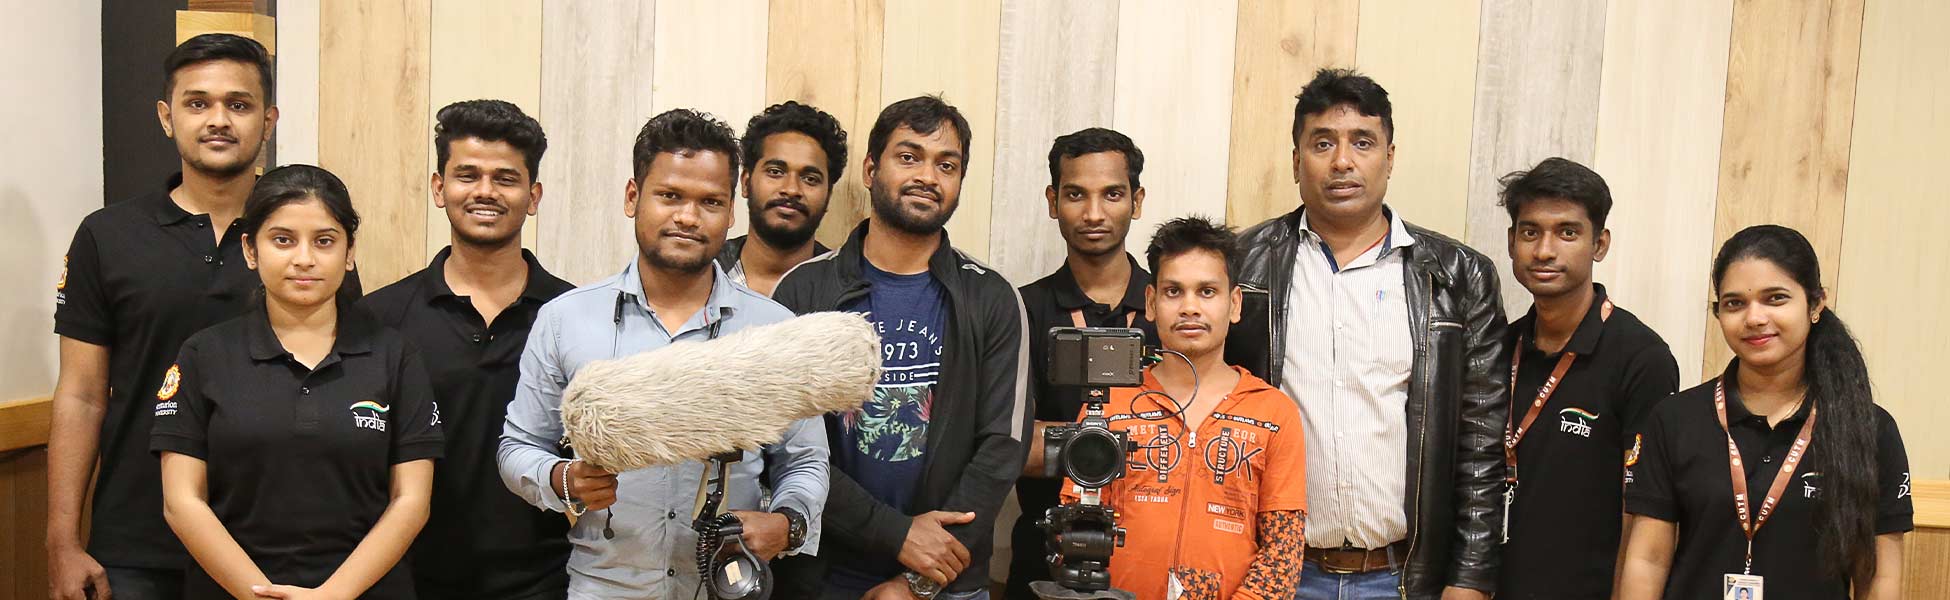 travel documentary production services in india, travel documentary production services in delhi